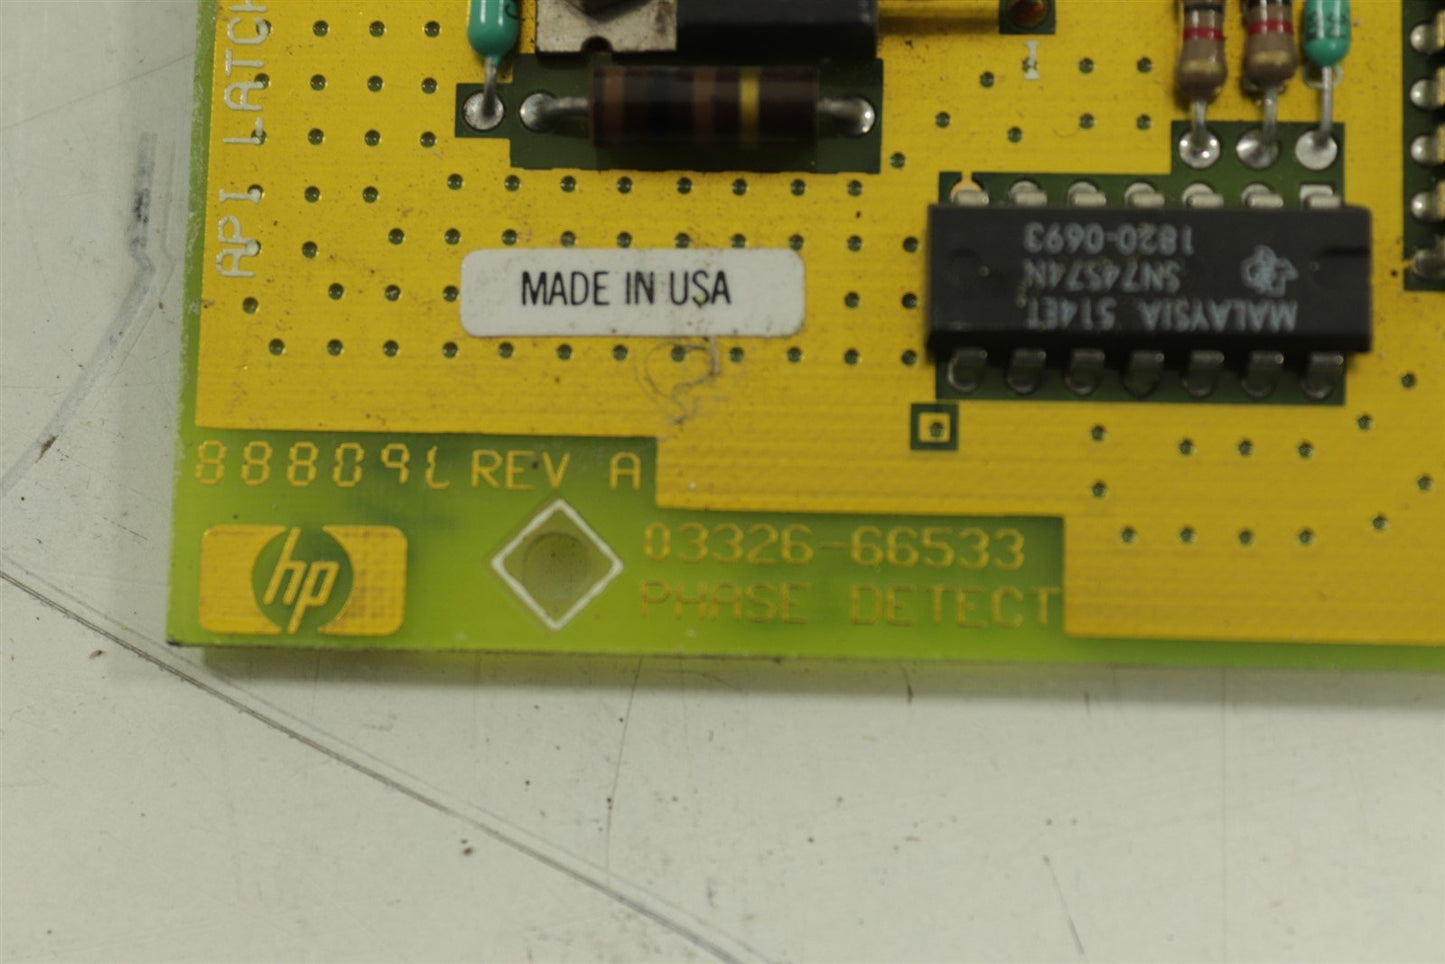 HP PHASE DETECT CARD 03326-66533